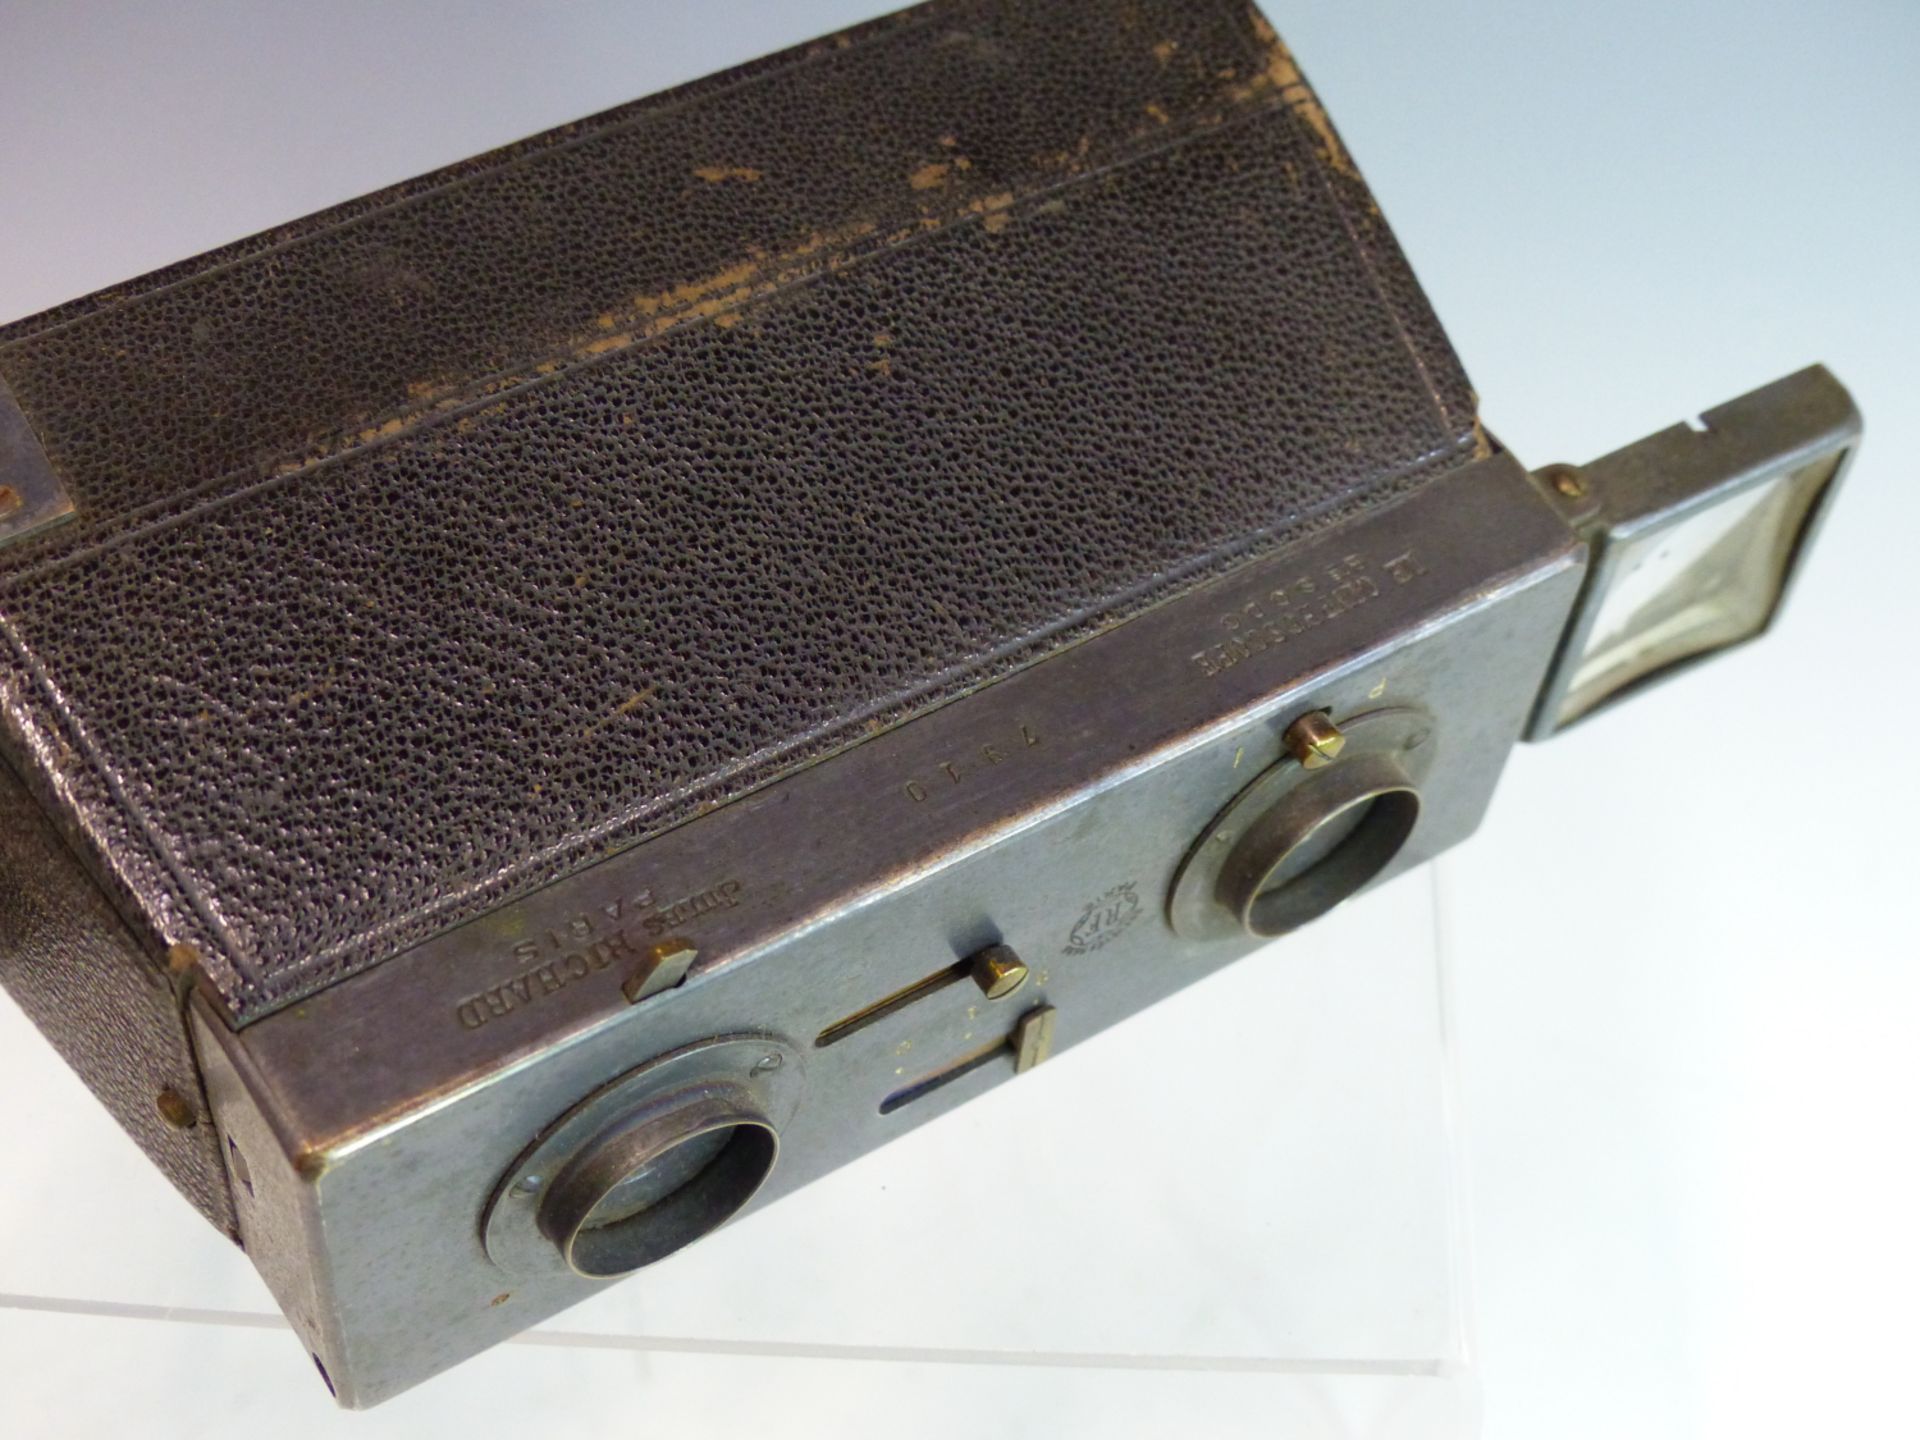 A RARE FRENCH GLYPHOSCOPE STEREOSCOPIC CAMERA BY JULES RICHARD, PARIS. IN ITS ORIGINAL POUCH WITH - Image 3 of 4